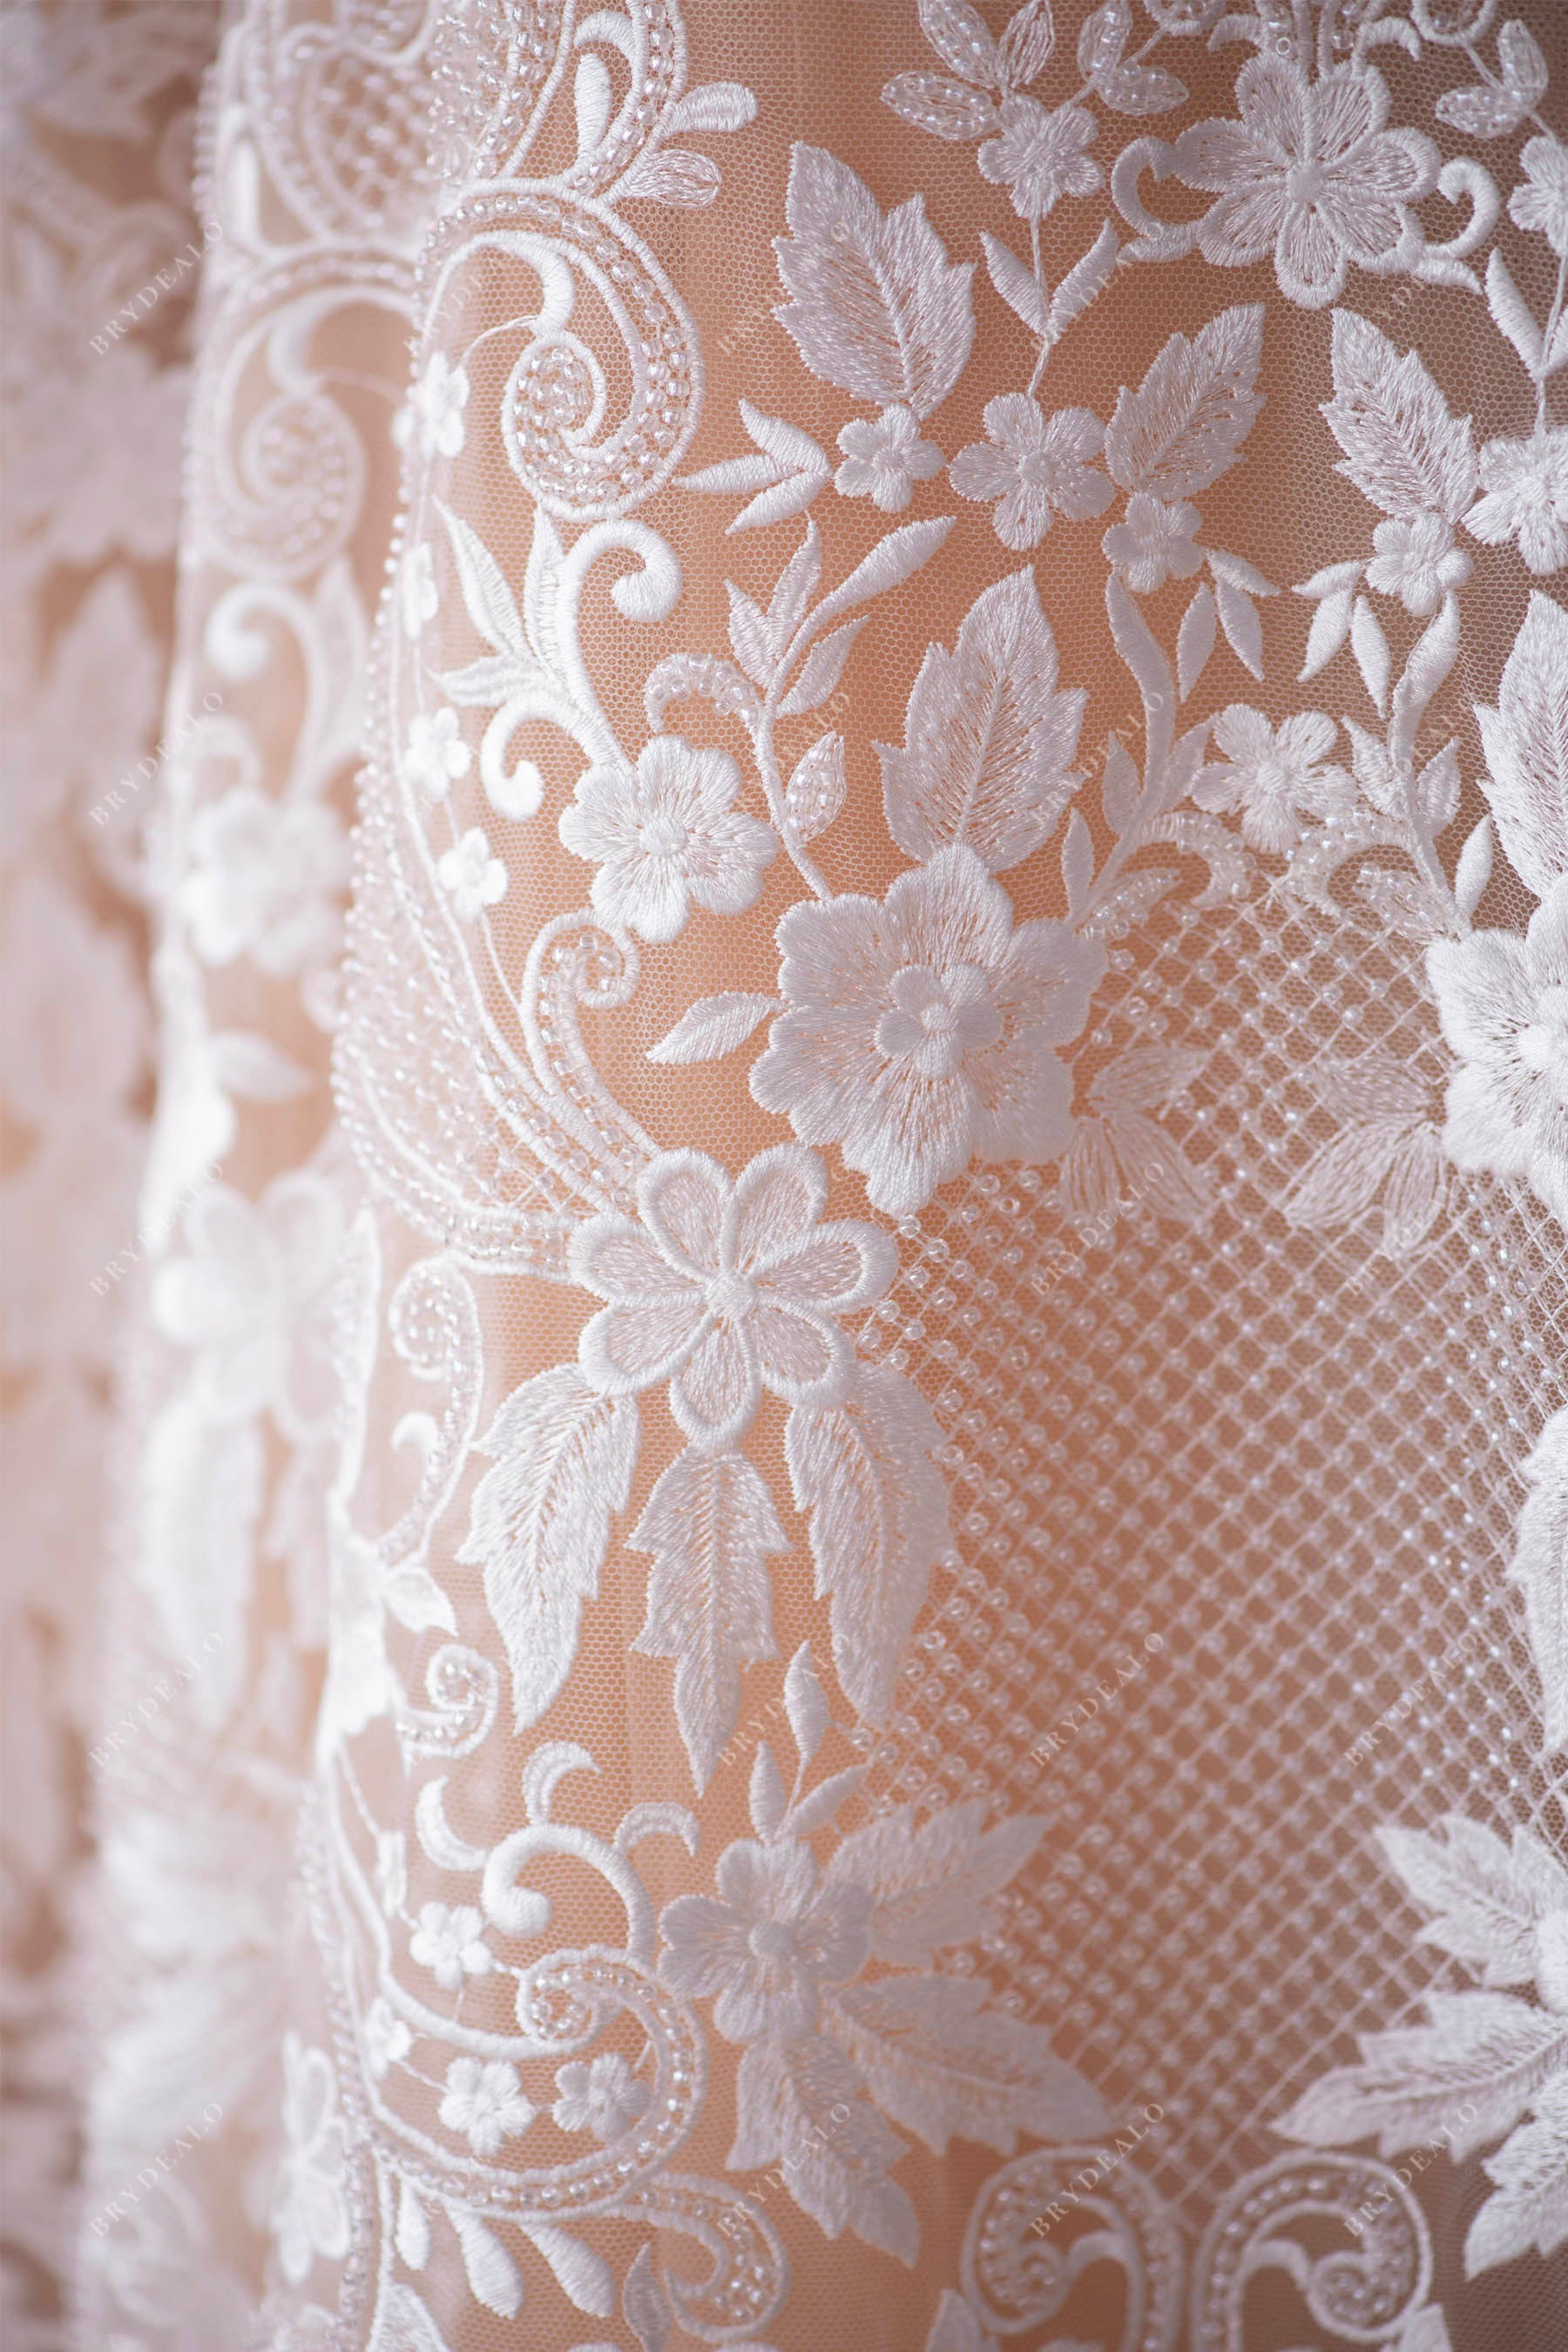 Beaded Ivory Floral Bridal Lace Fabric by the Yard - OneYard